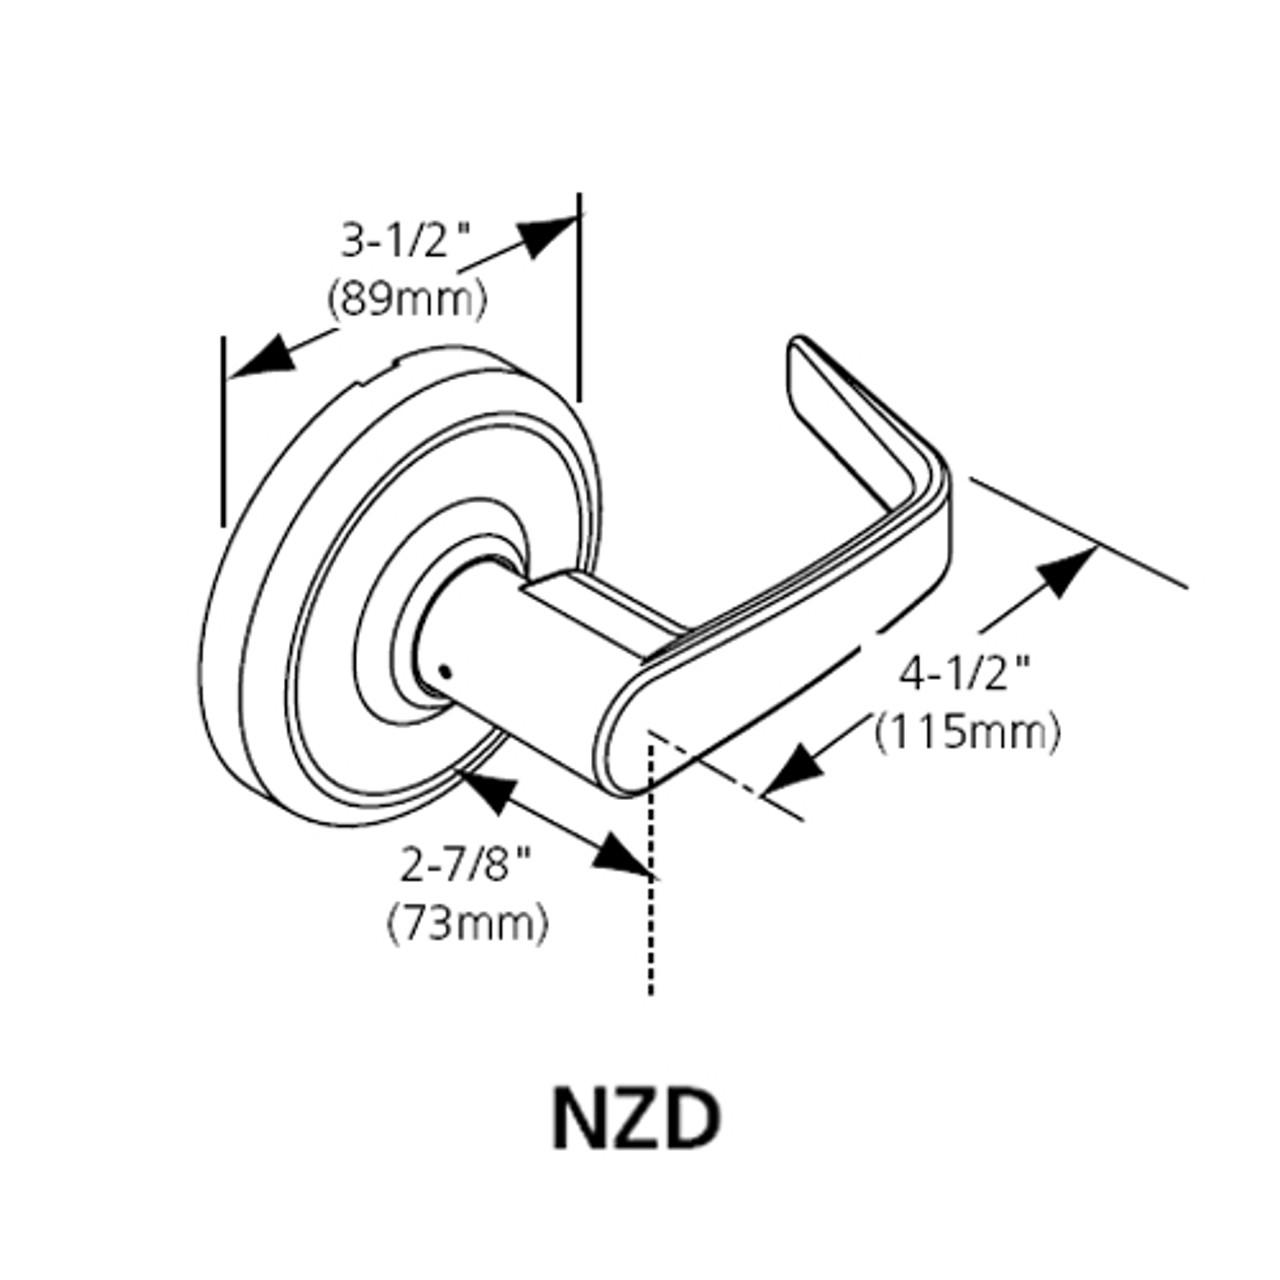 CL3162-NZD-619 Corbin CL3100 Series Vandal Resistant Communicating Cylindrical Locksets with Newport Lever in Satin Nickel Plated